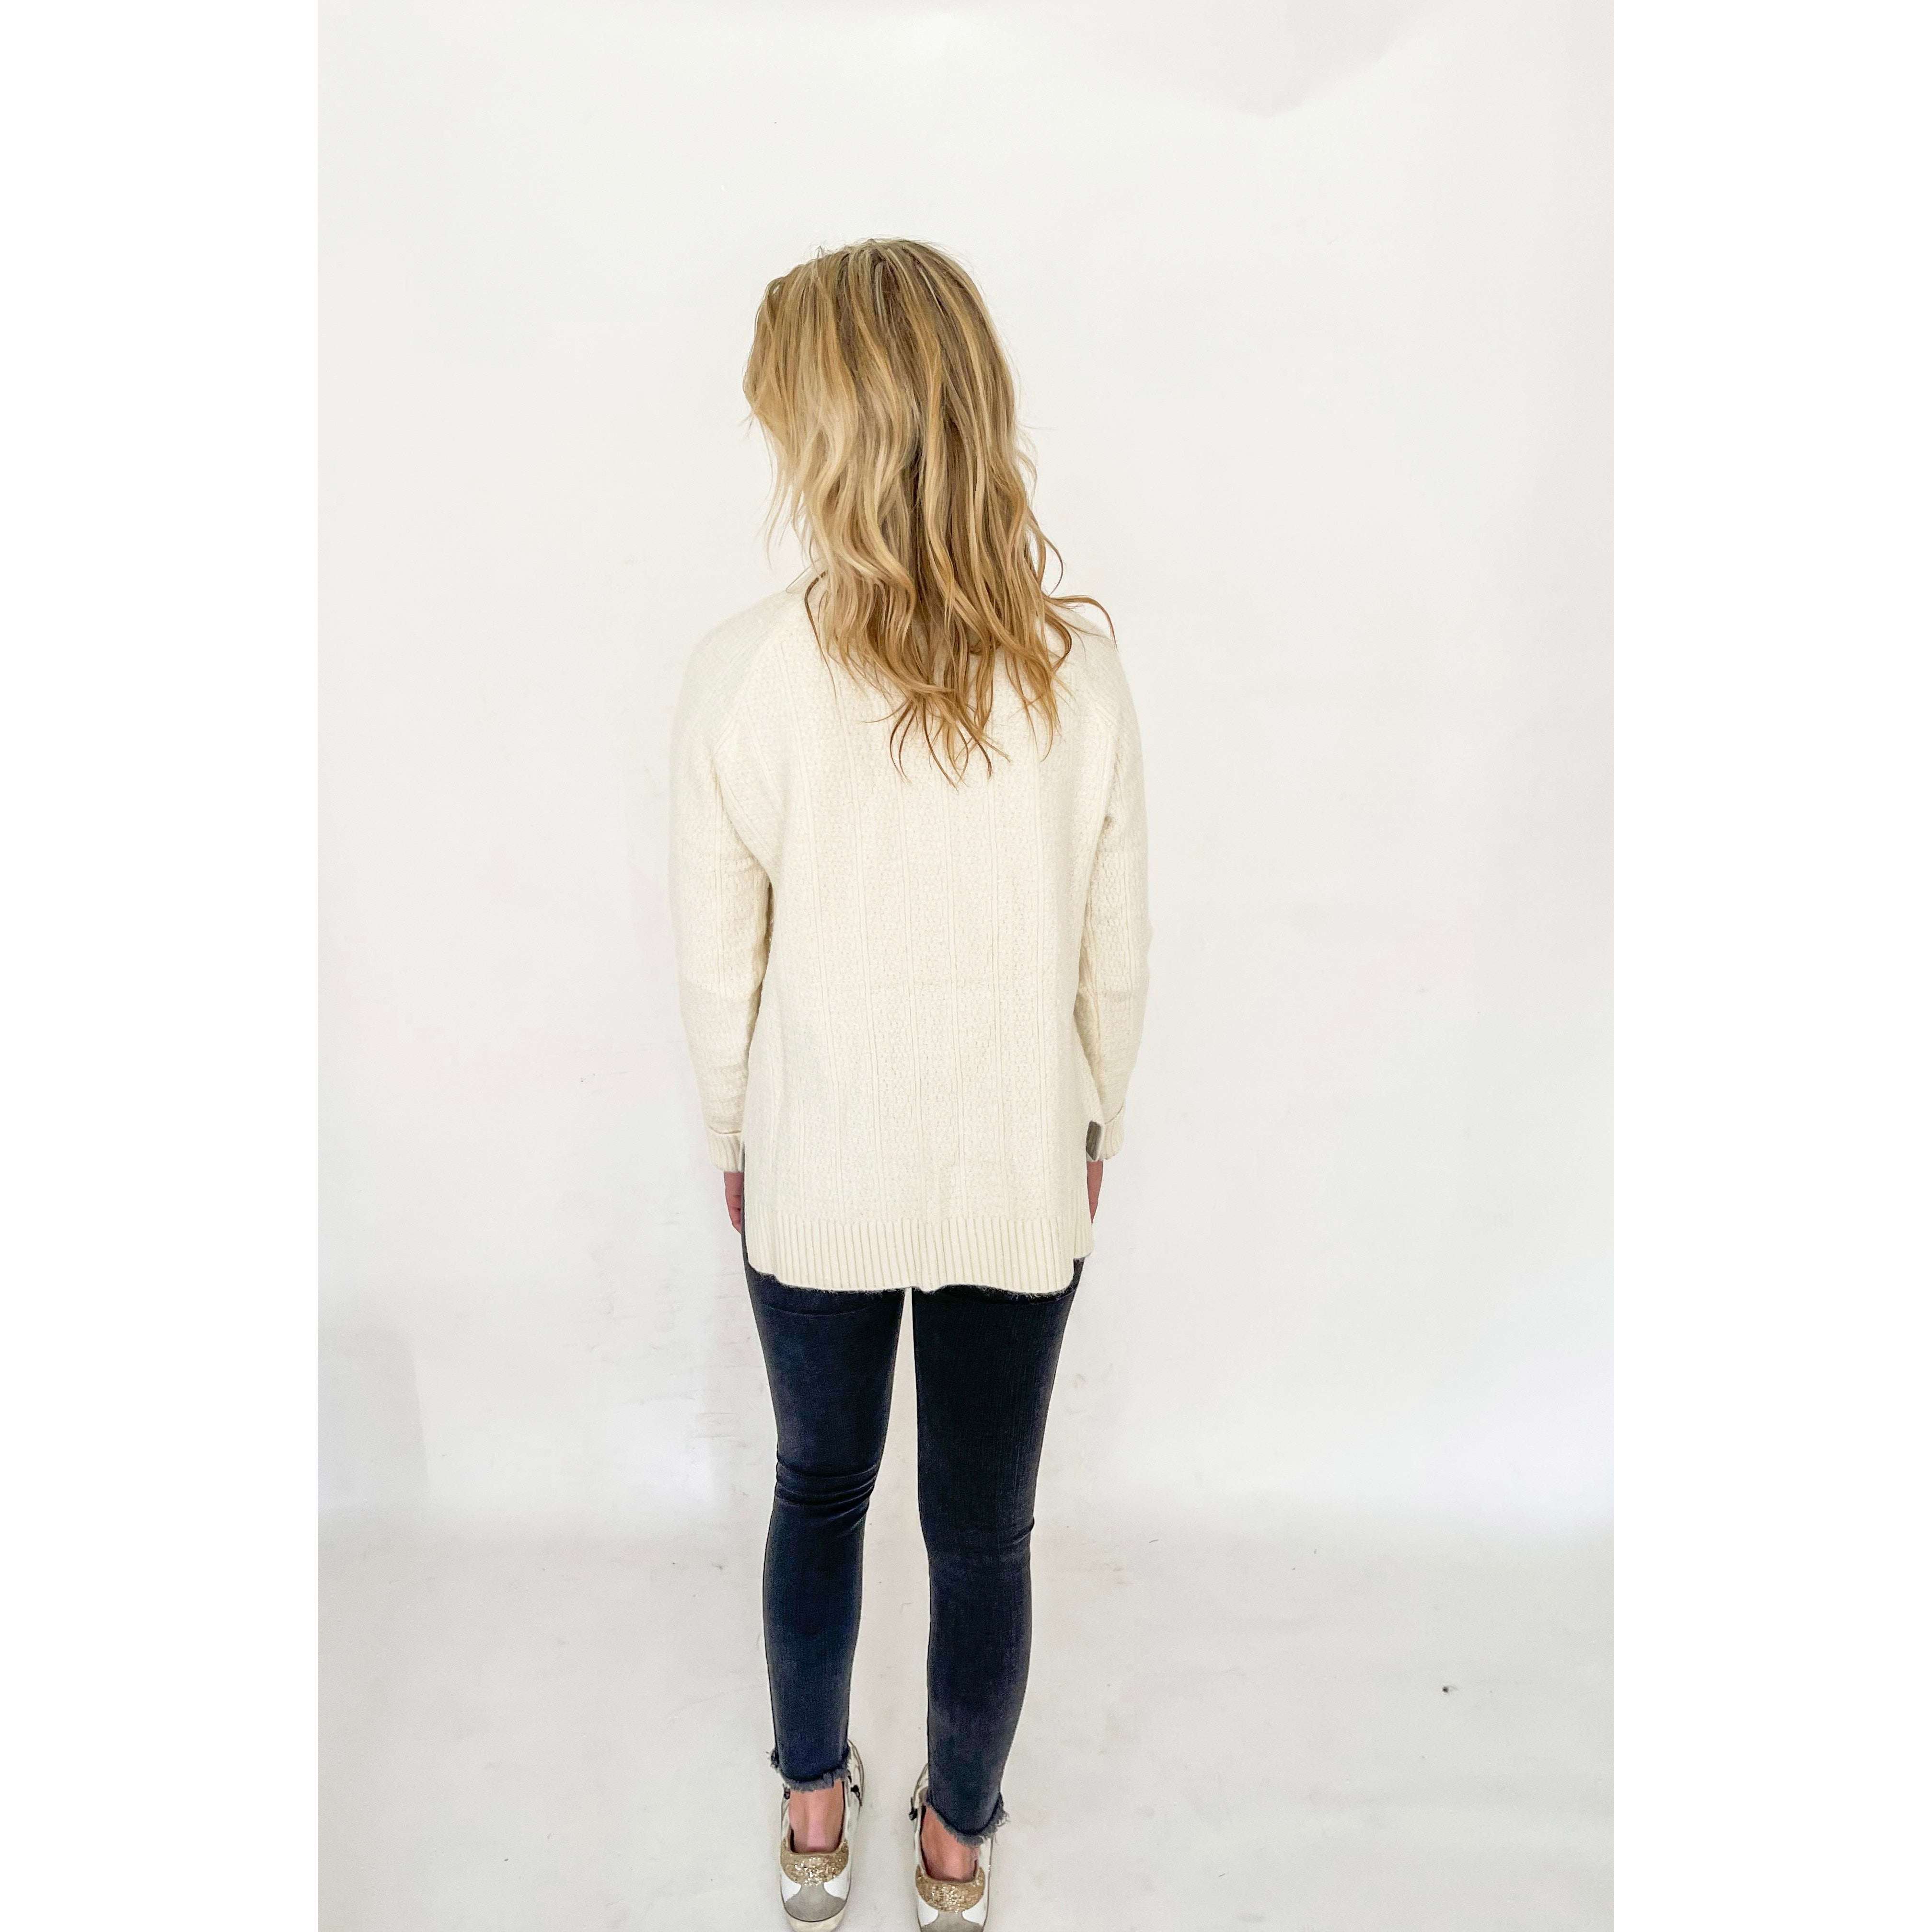 8.28 Boutique:Karlie Clothes,Karlie Clothes Pearl Mock Neck Sweater,Sweaters